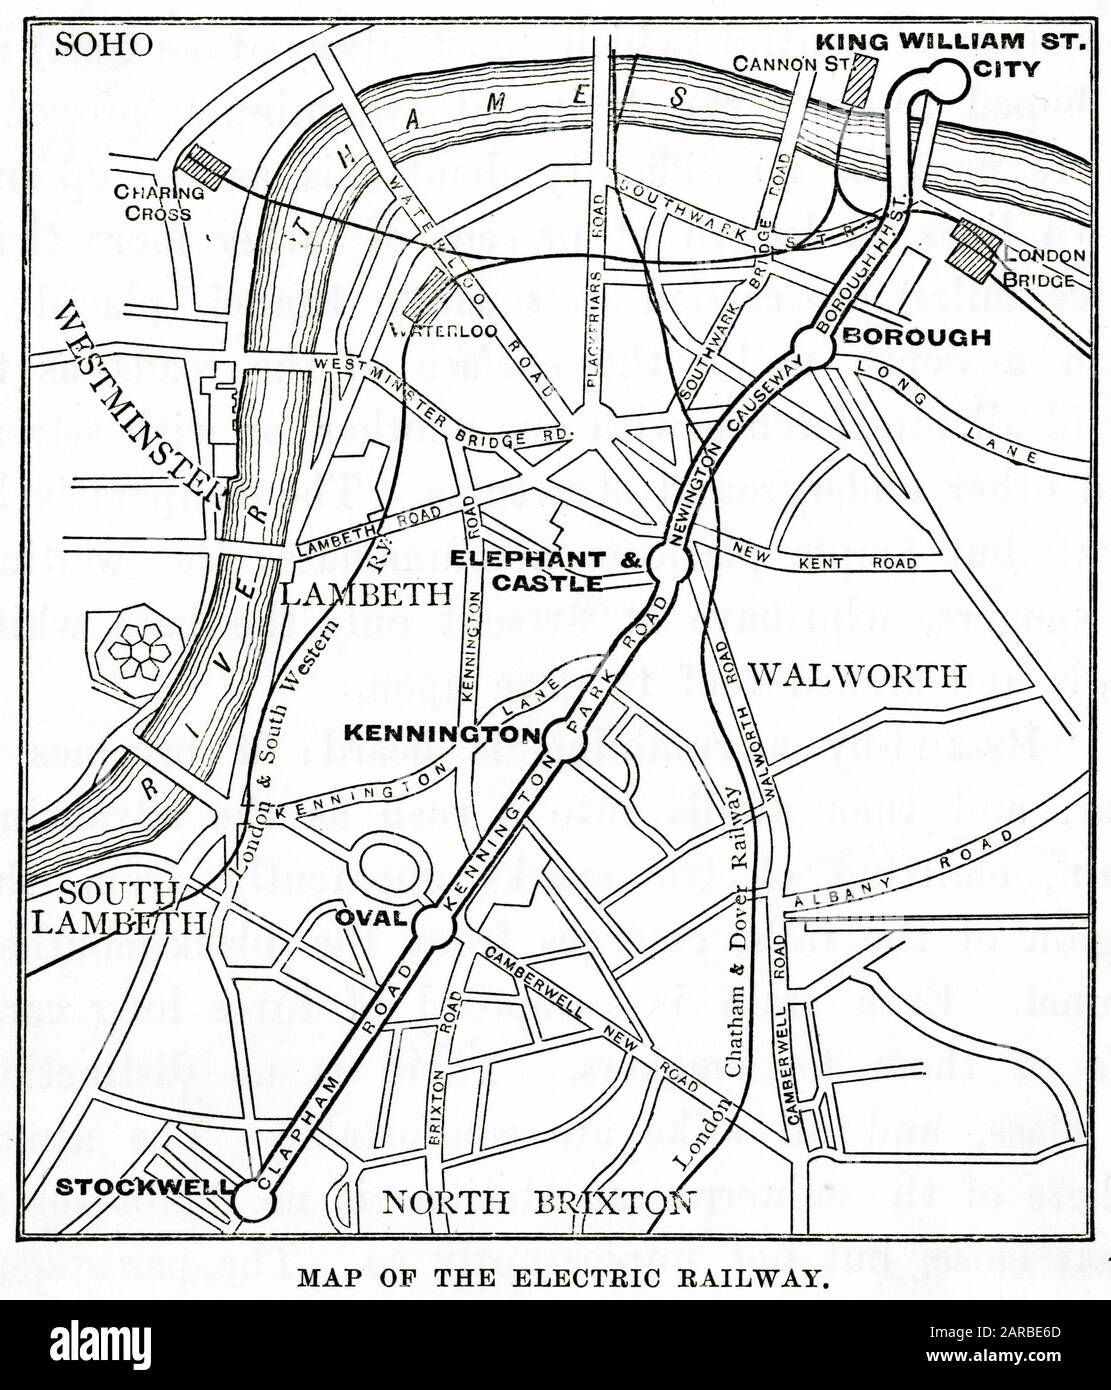 Map of underground and overground stations connecting the City to South London. The overground lines are the London & South Western Railway and the London Chatham & Dover Railway, serving London Bridge, Cannon Street, Waterloo and Charing Cross. The underground line was named the City Line (now part of the Northern Line), running from City (now Bank) to Stockwell, via Borough, Elephant & Castle, Kennington and Oval. Stock Photo